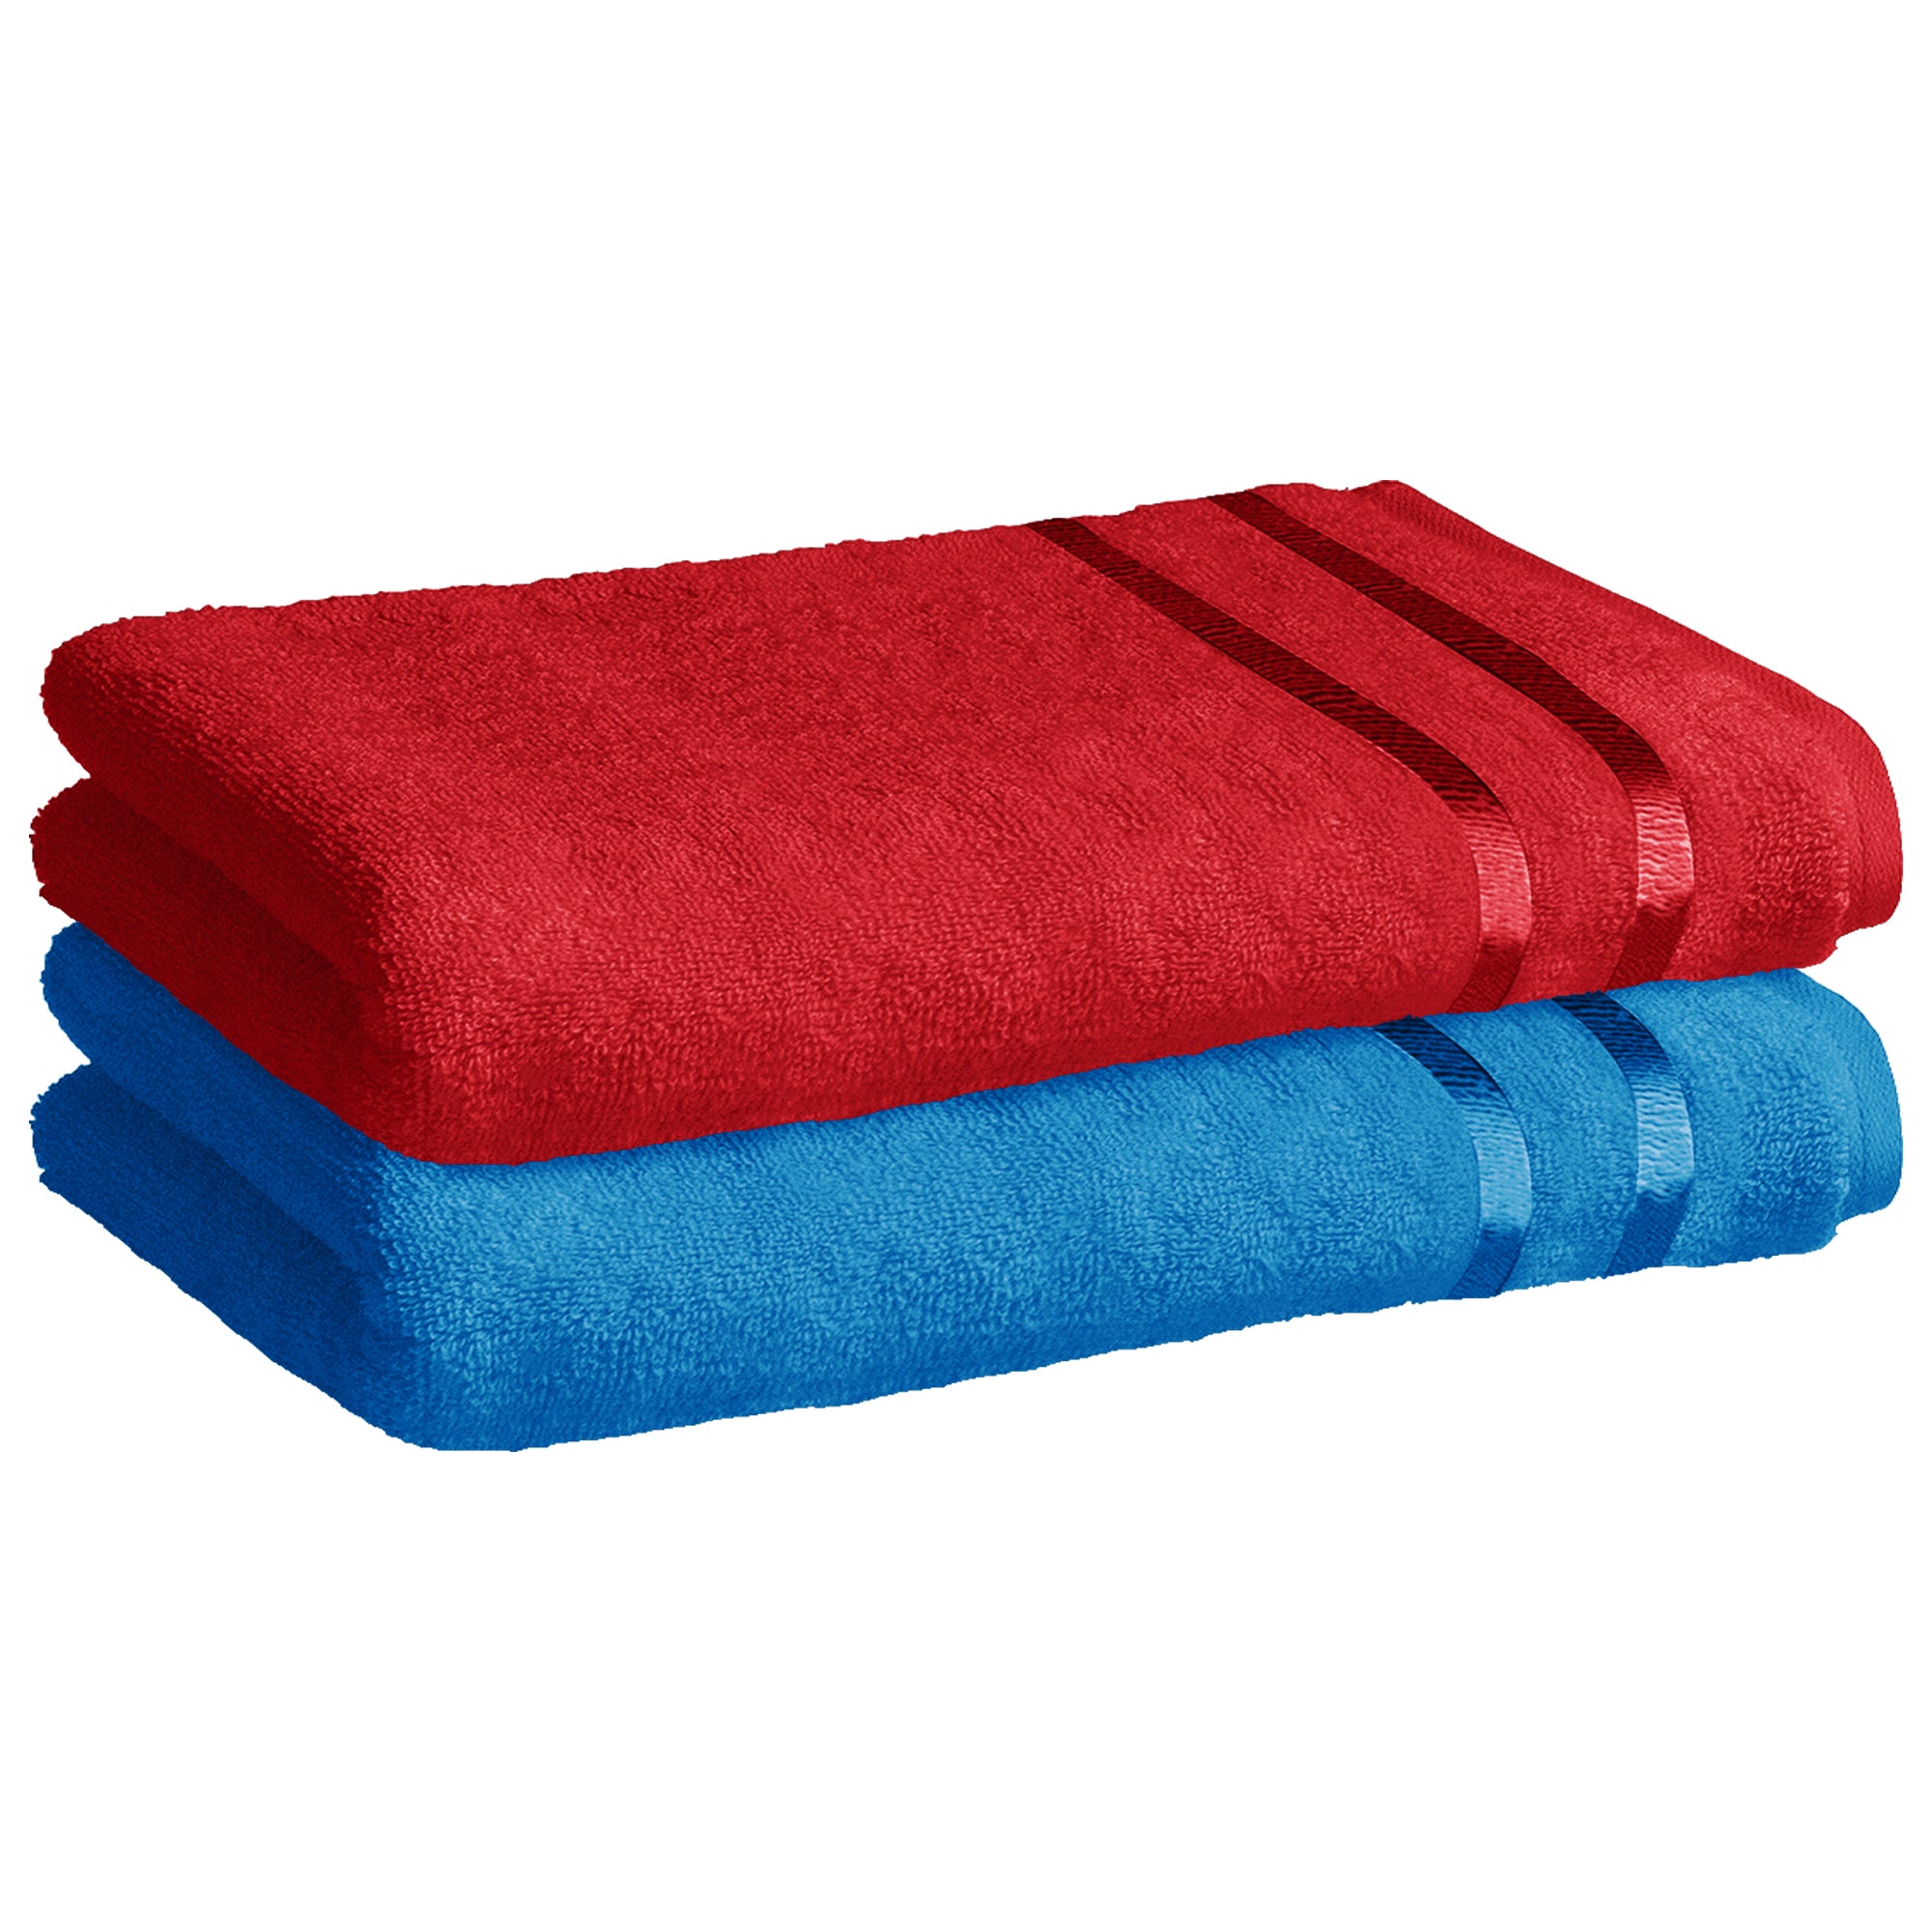 Story@Home 2 Units 100% Cotton Bath Towels - Blue and Wine Red